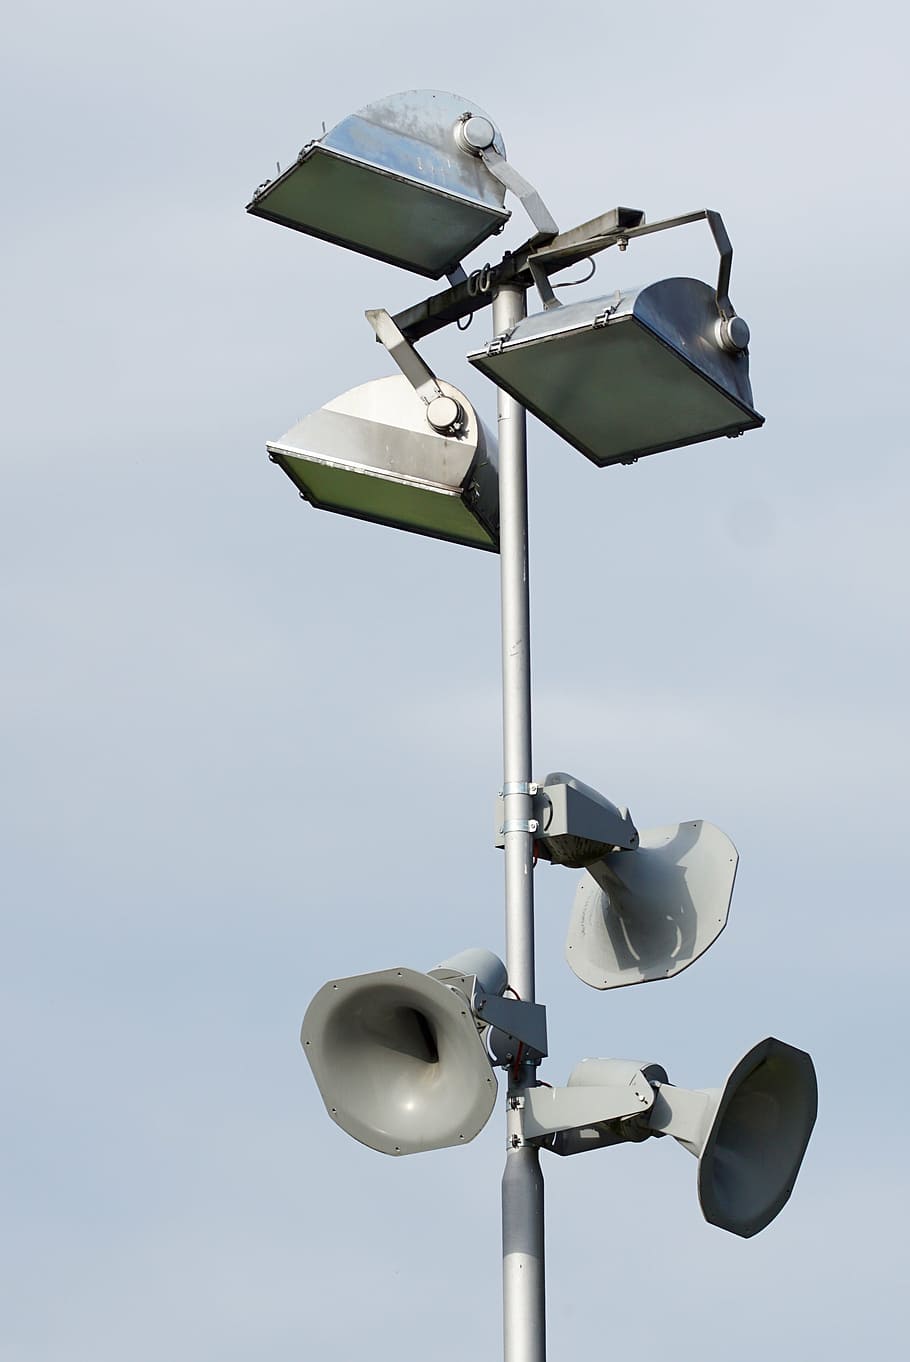 mast, light, lamps, speakers, sports ground, sky, low angle view, security camera, street, lighting equipment